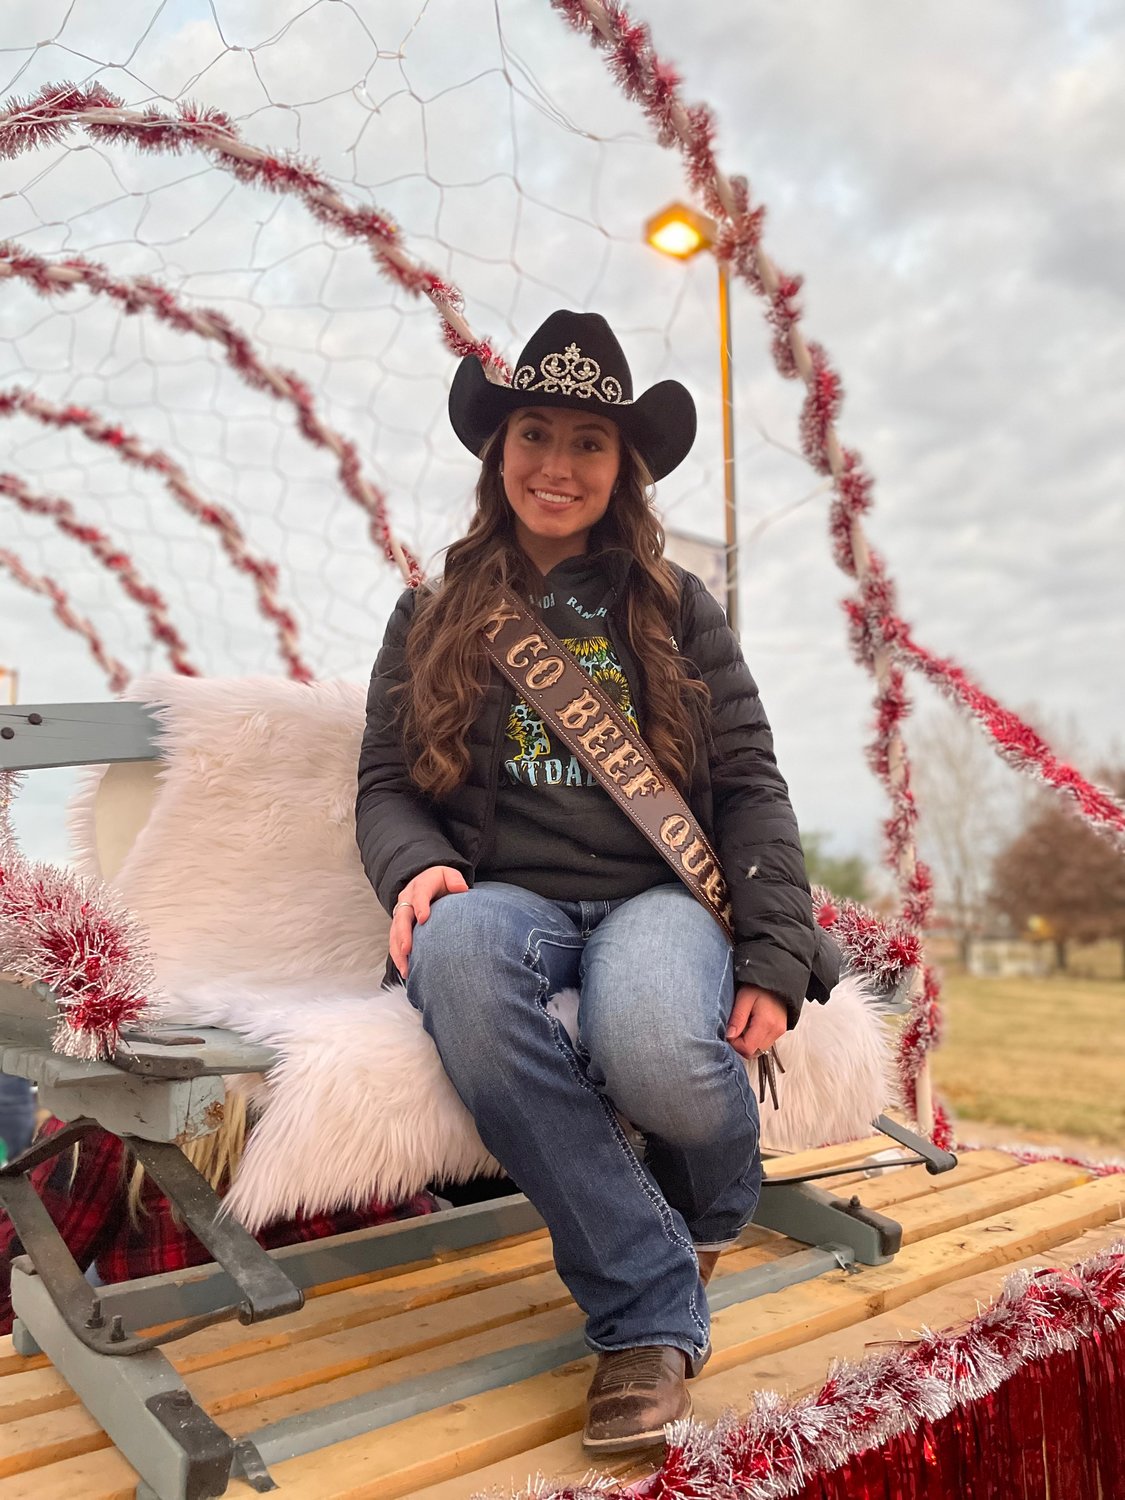 Madeline Payne was crowned the 2021-2022 Polk County Beef Queen. As the reigning queen, she encourages all young women who are interested in applying for this year’s Polk County Beef Queen Scholarship Pageant to “to let your passion flow through and your unique light shine.”